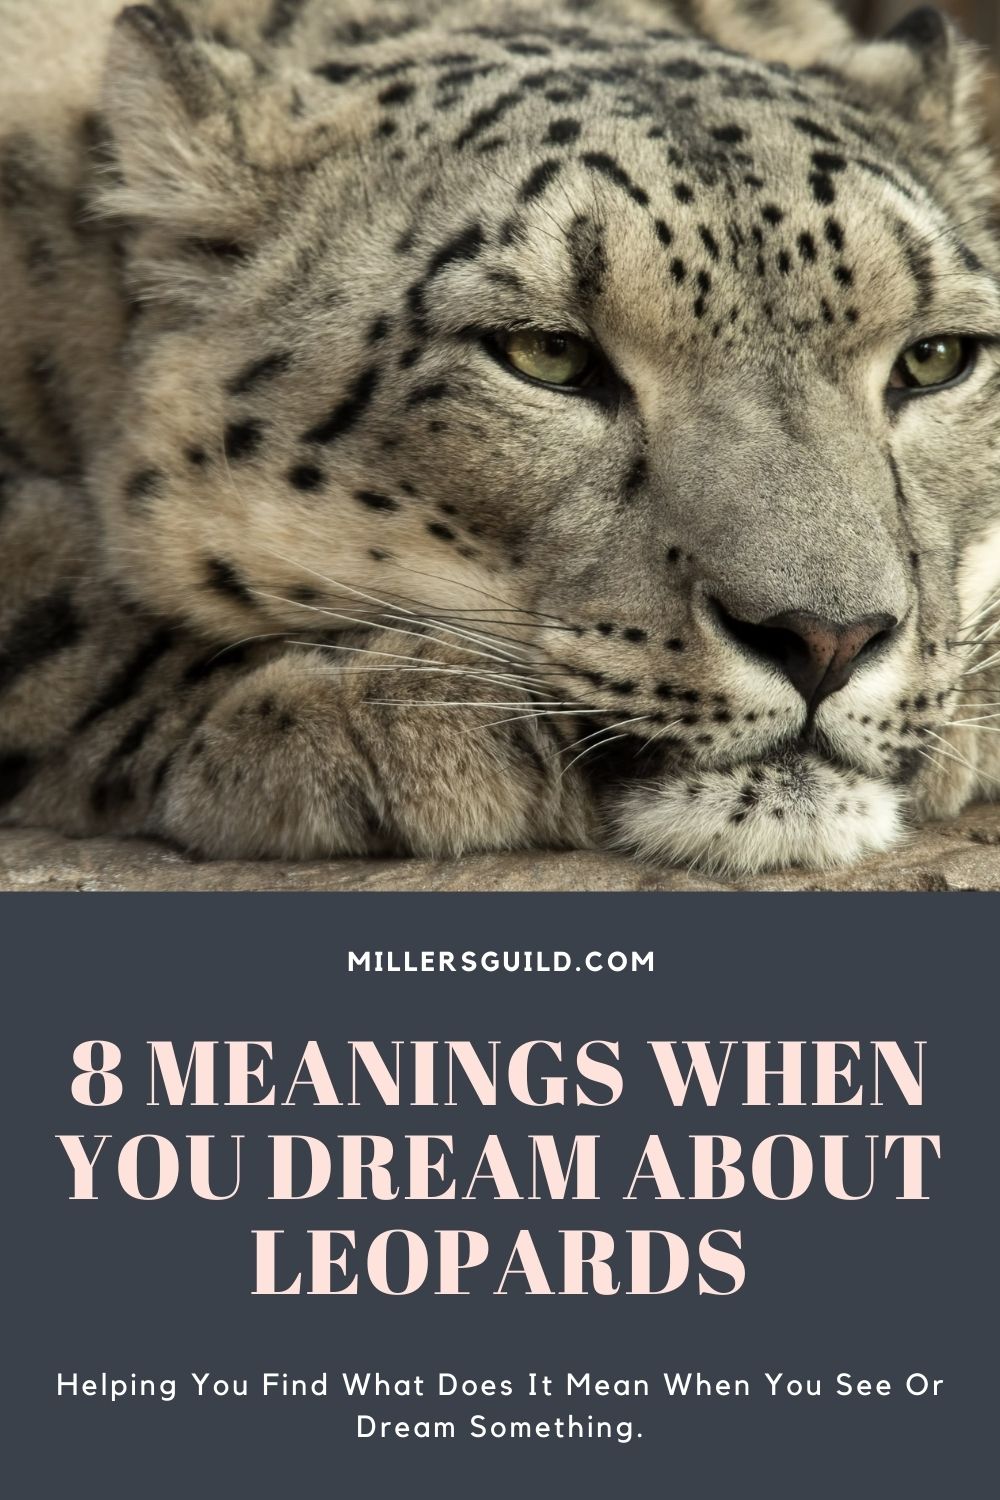 8-meanings-when-you-dream-about-leopards